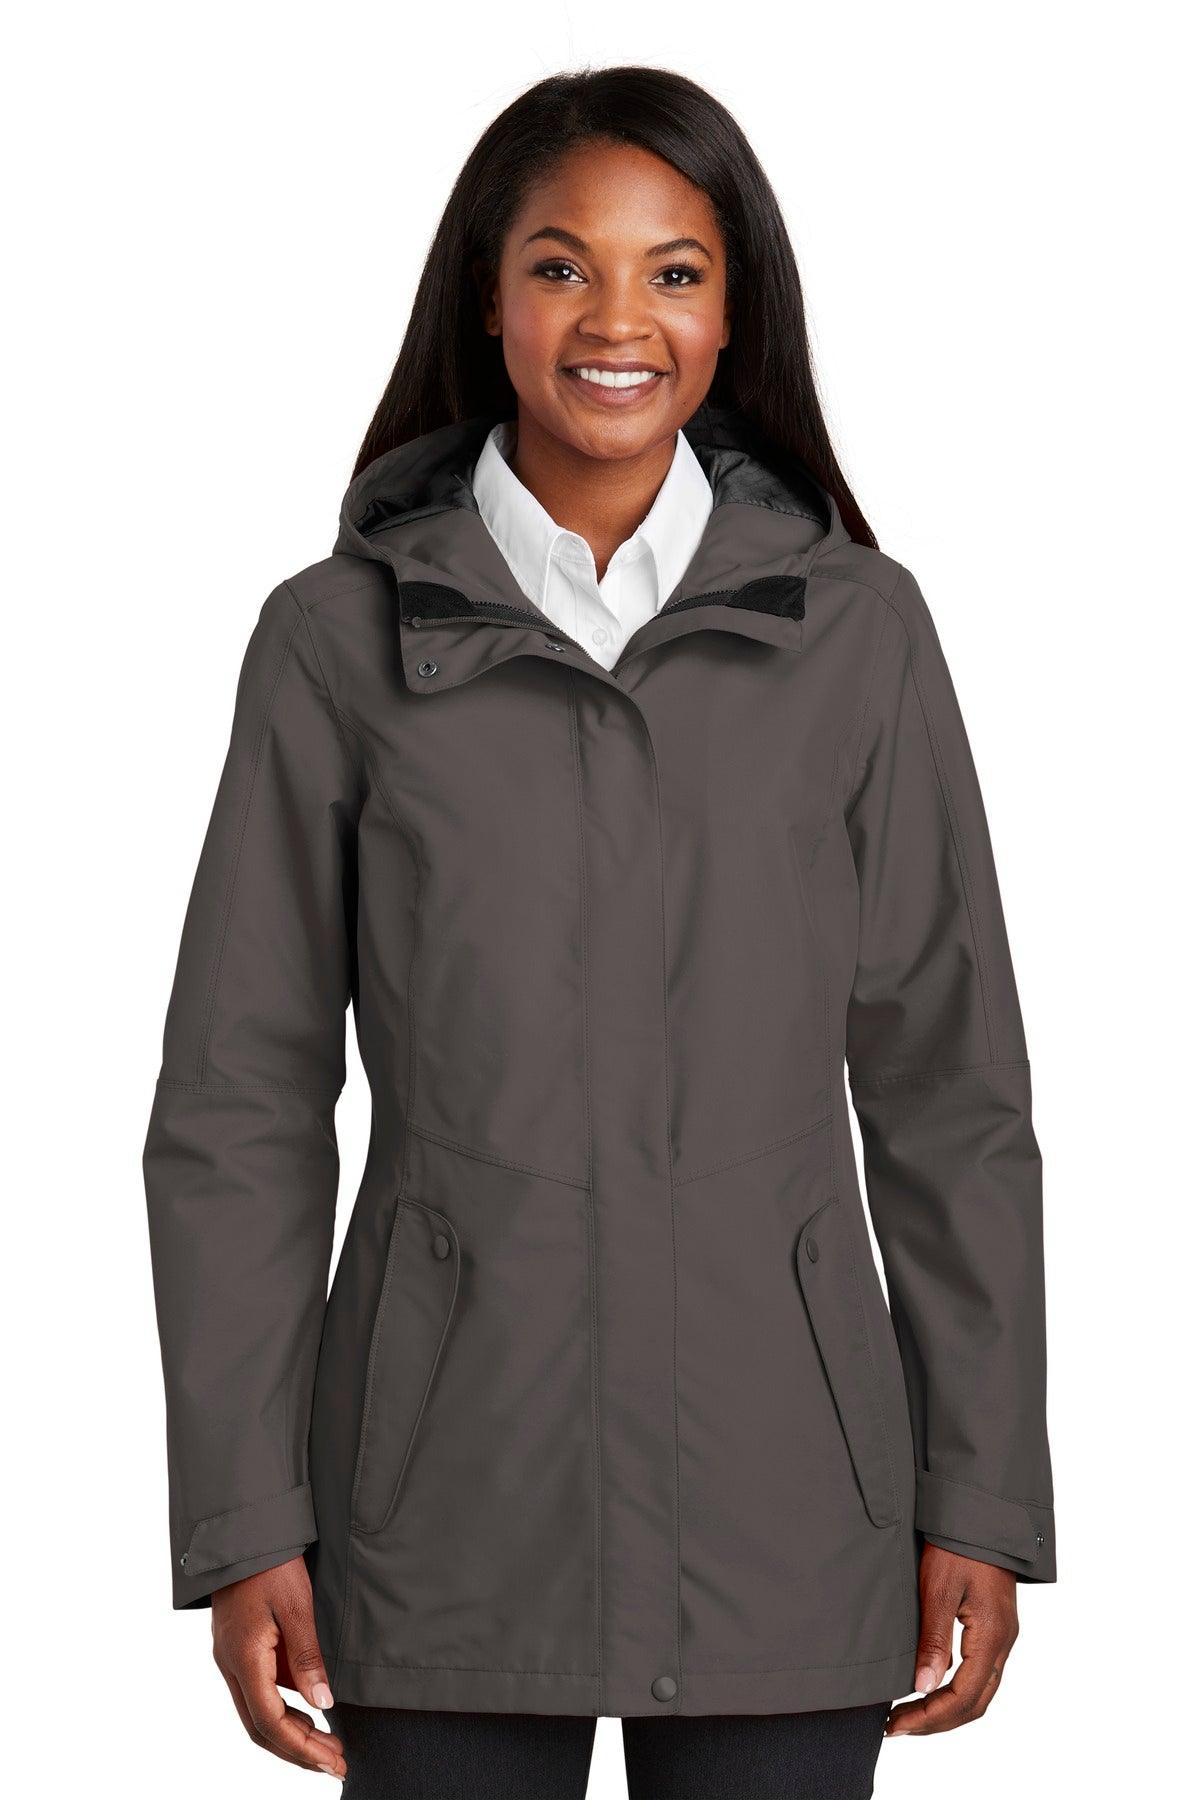 Port Authority Ladies Collective Outer Shell Jacket. L900 - Dresses Max